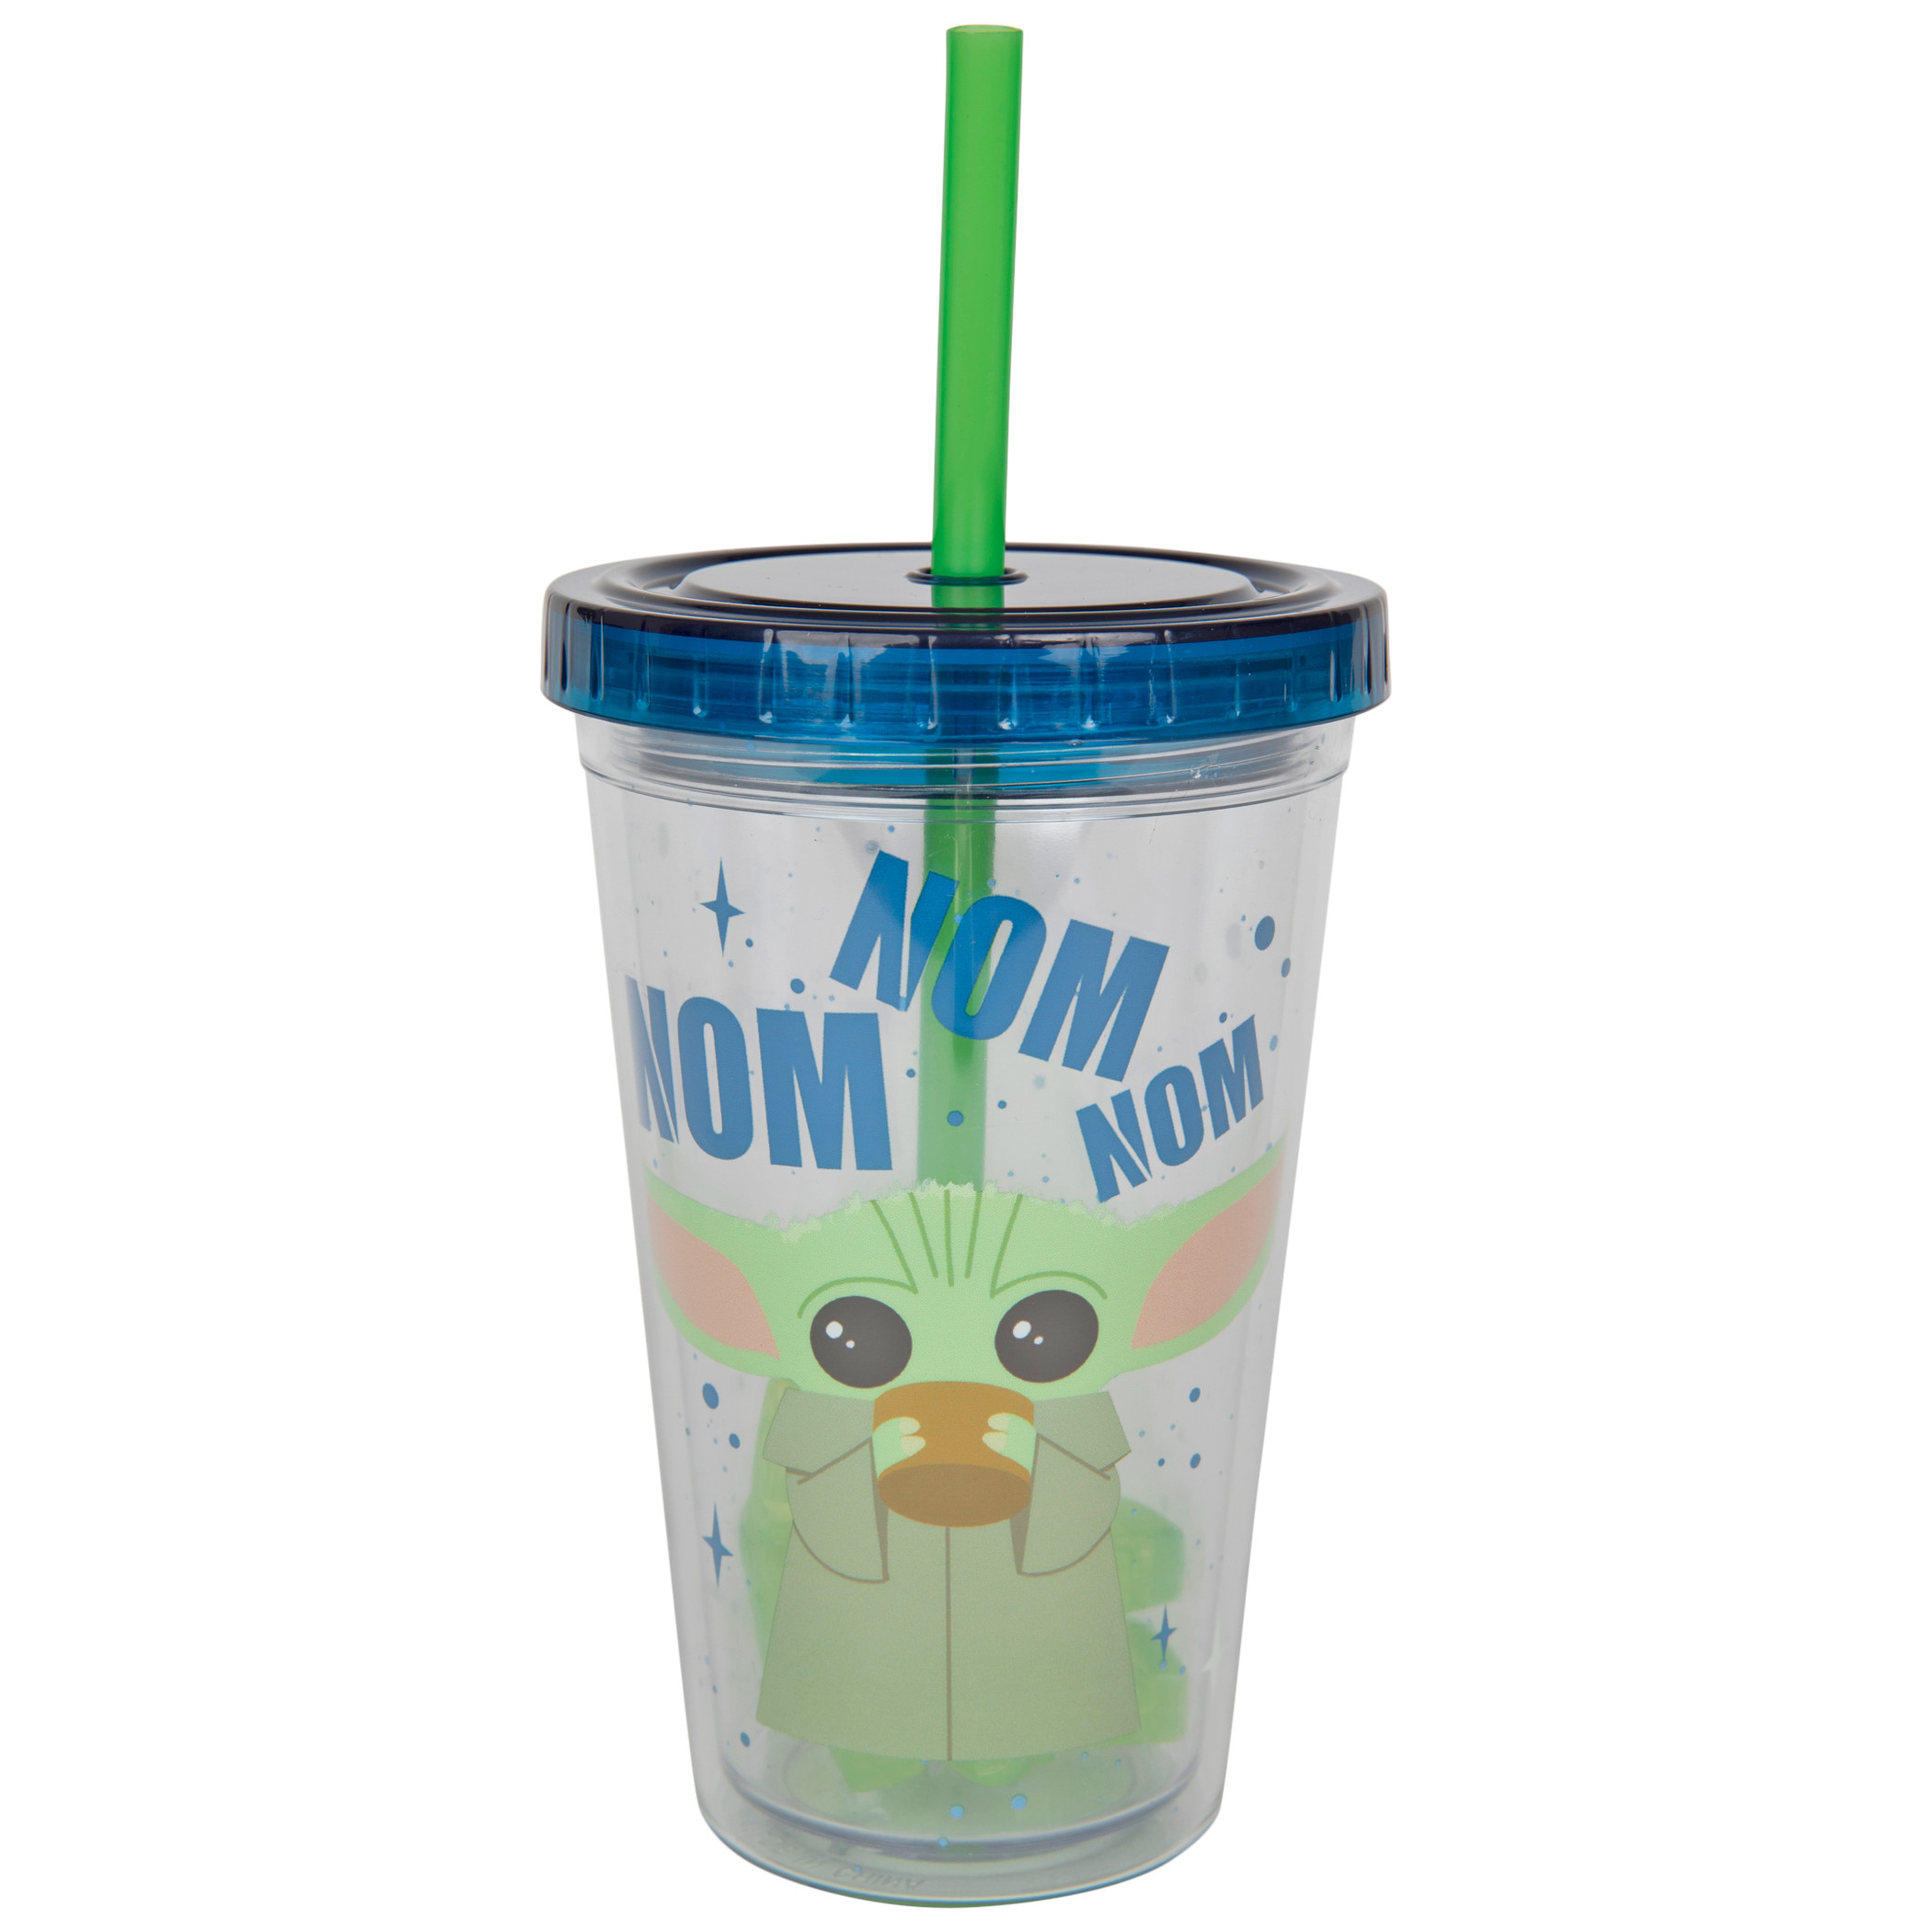 Star Wars The Mandalorian Nom Nom Nom 12oz Cup with Lid and Straw